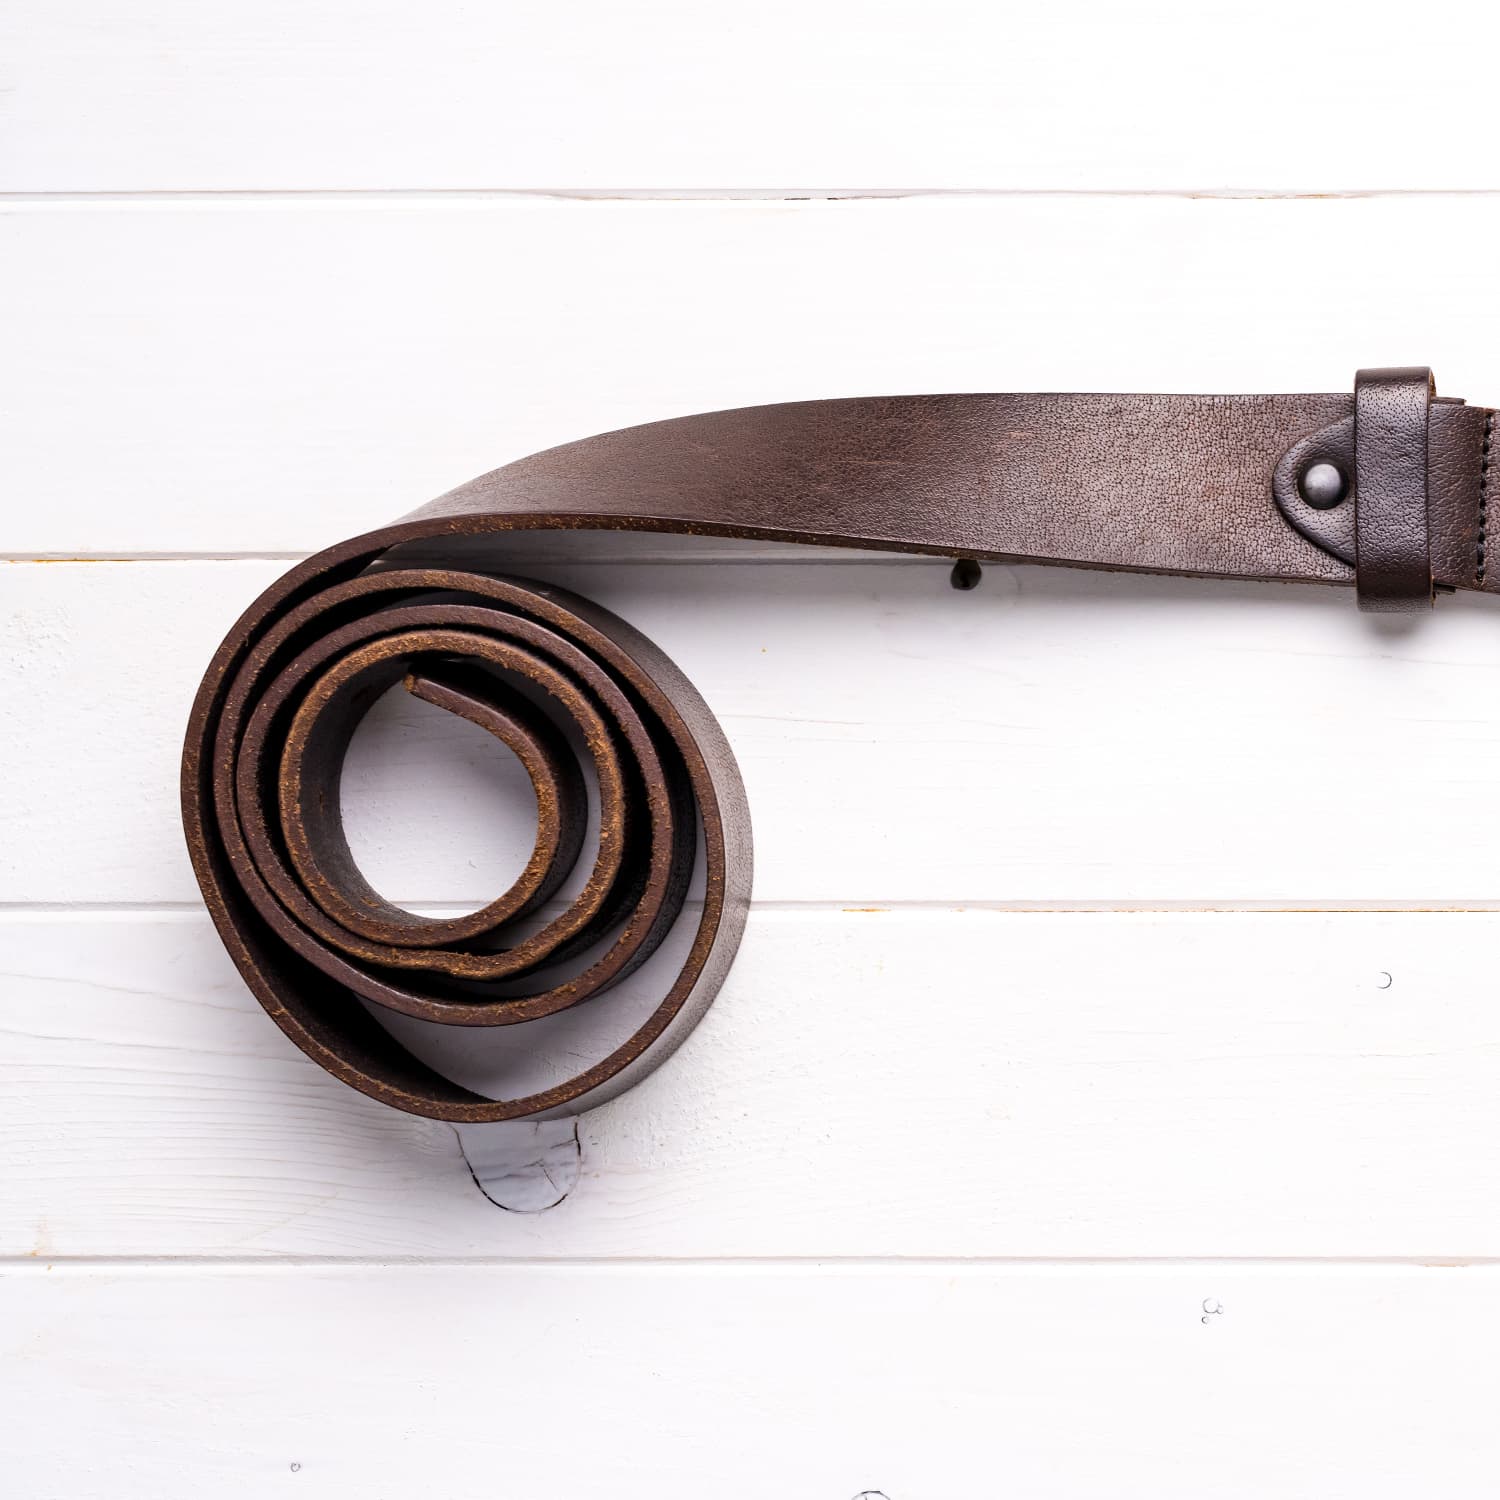 New Reuses For Old Leather Belts - Cool Ways to Reuse Old Leather